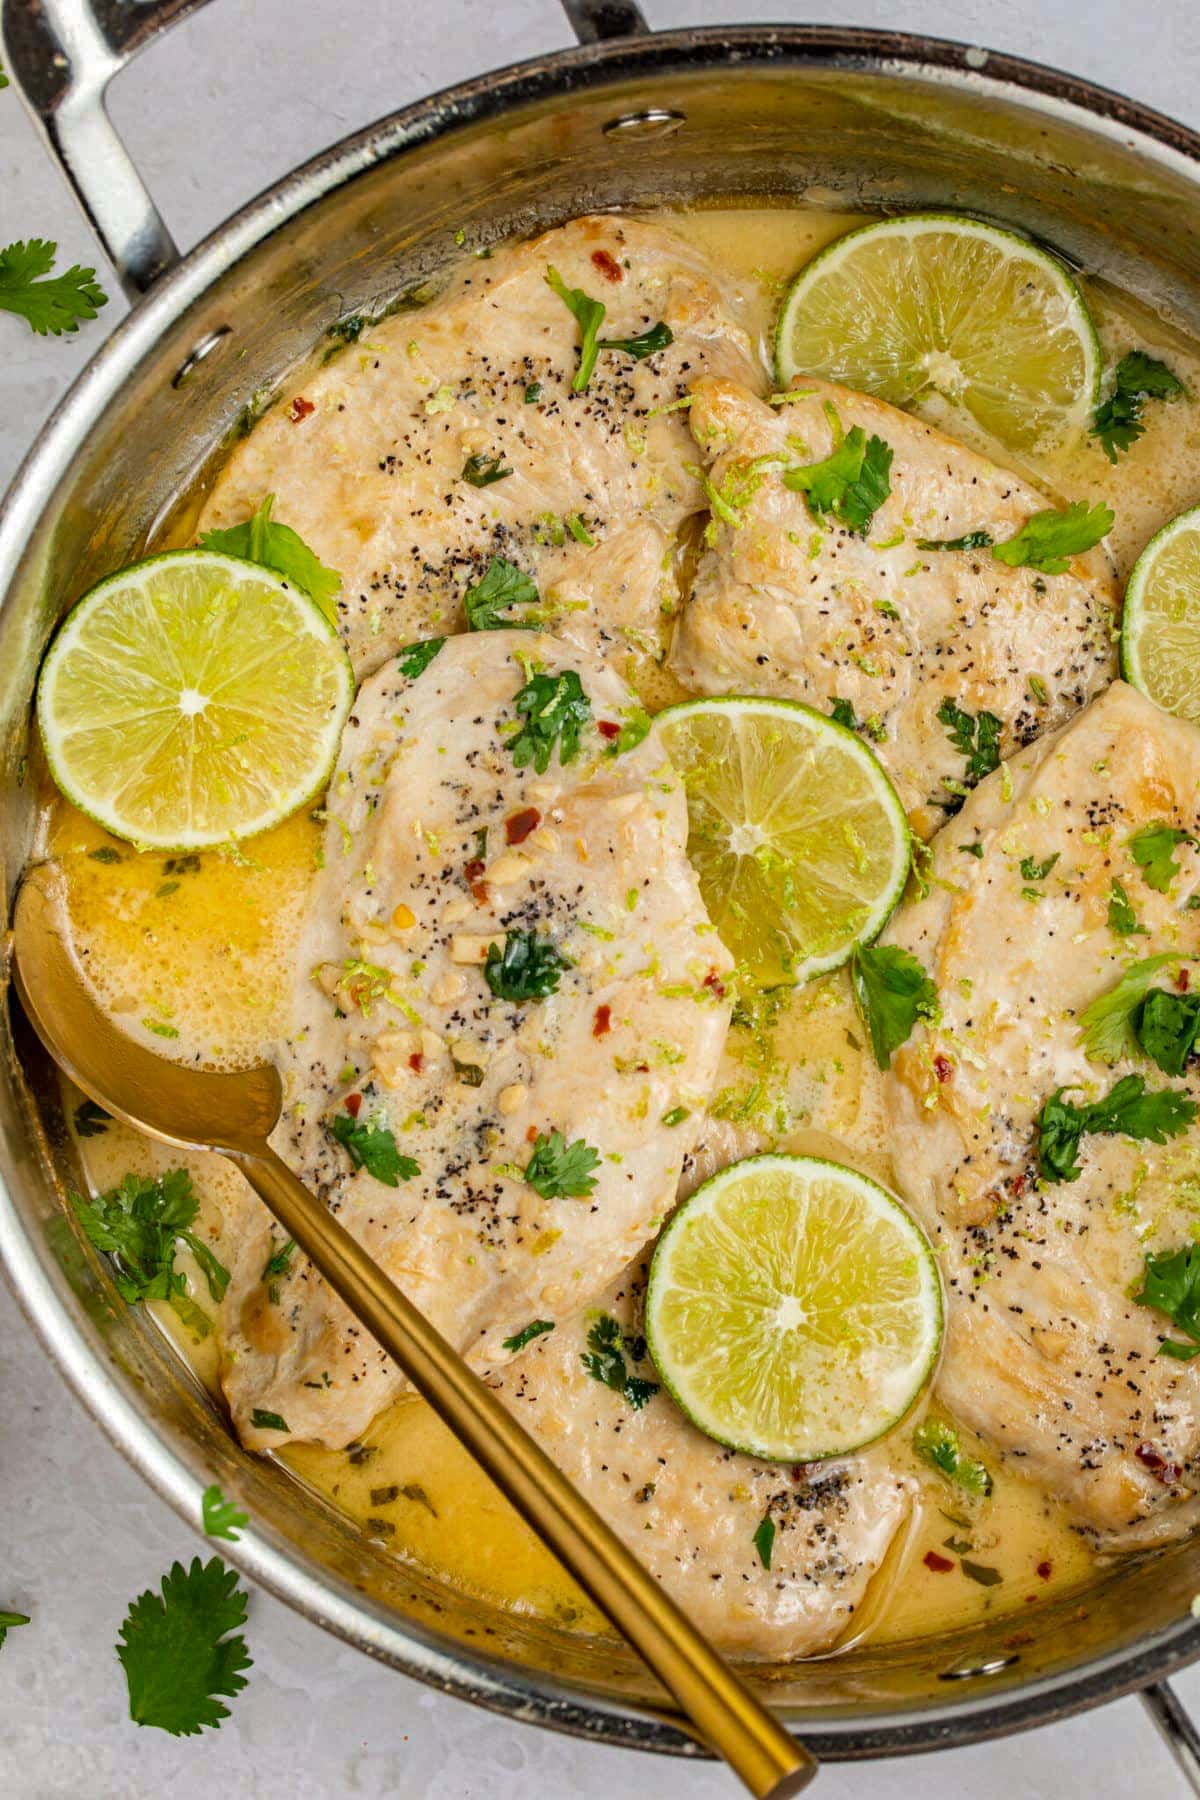 A large skillet containing seared chicken breasts with a creamy coconut lime sauce and discs of limes.